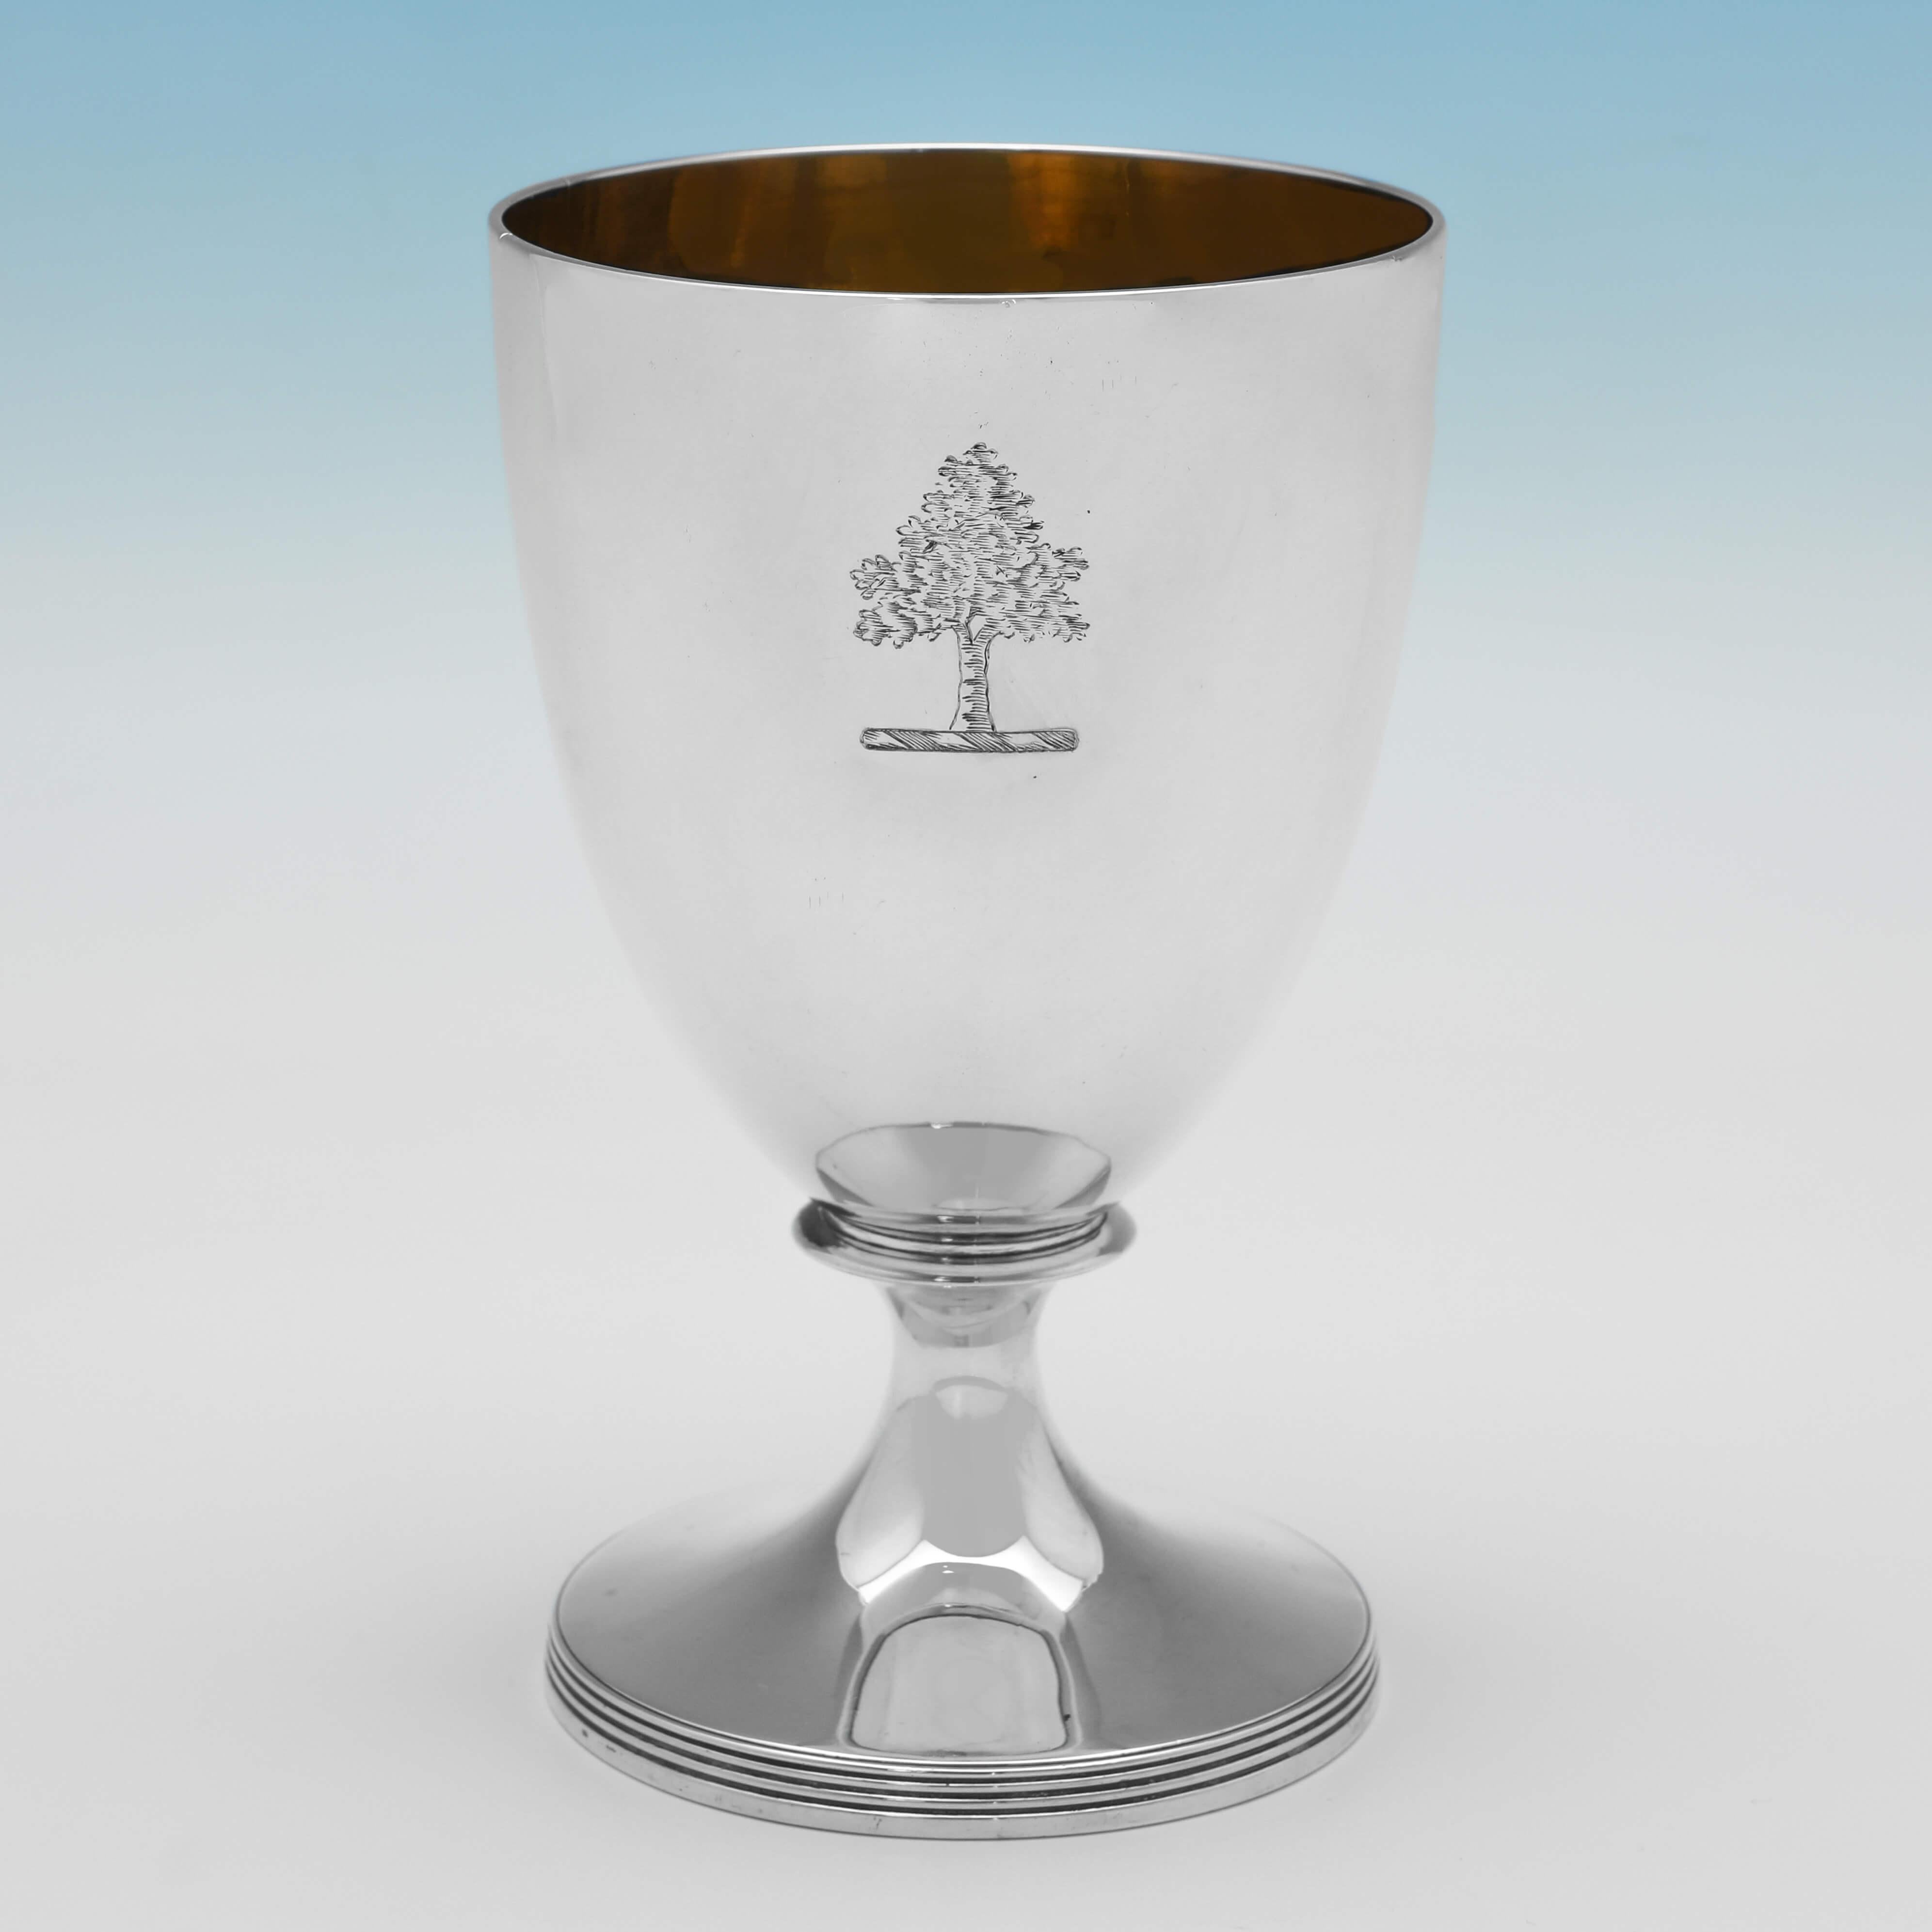 Hallmarked in London in 1802 by John Emes, this handsome pair of George III period, Antique Sterling Silver Goblets, are elegant in design, featuring engraved crests to each, reed detailing and gilt interiors. 

Each goblet measures 6